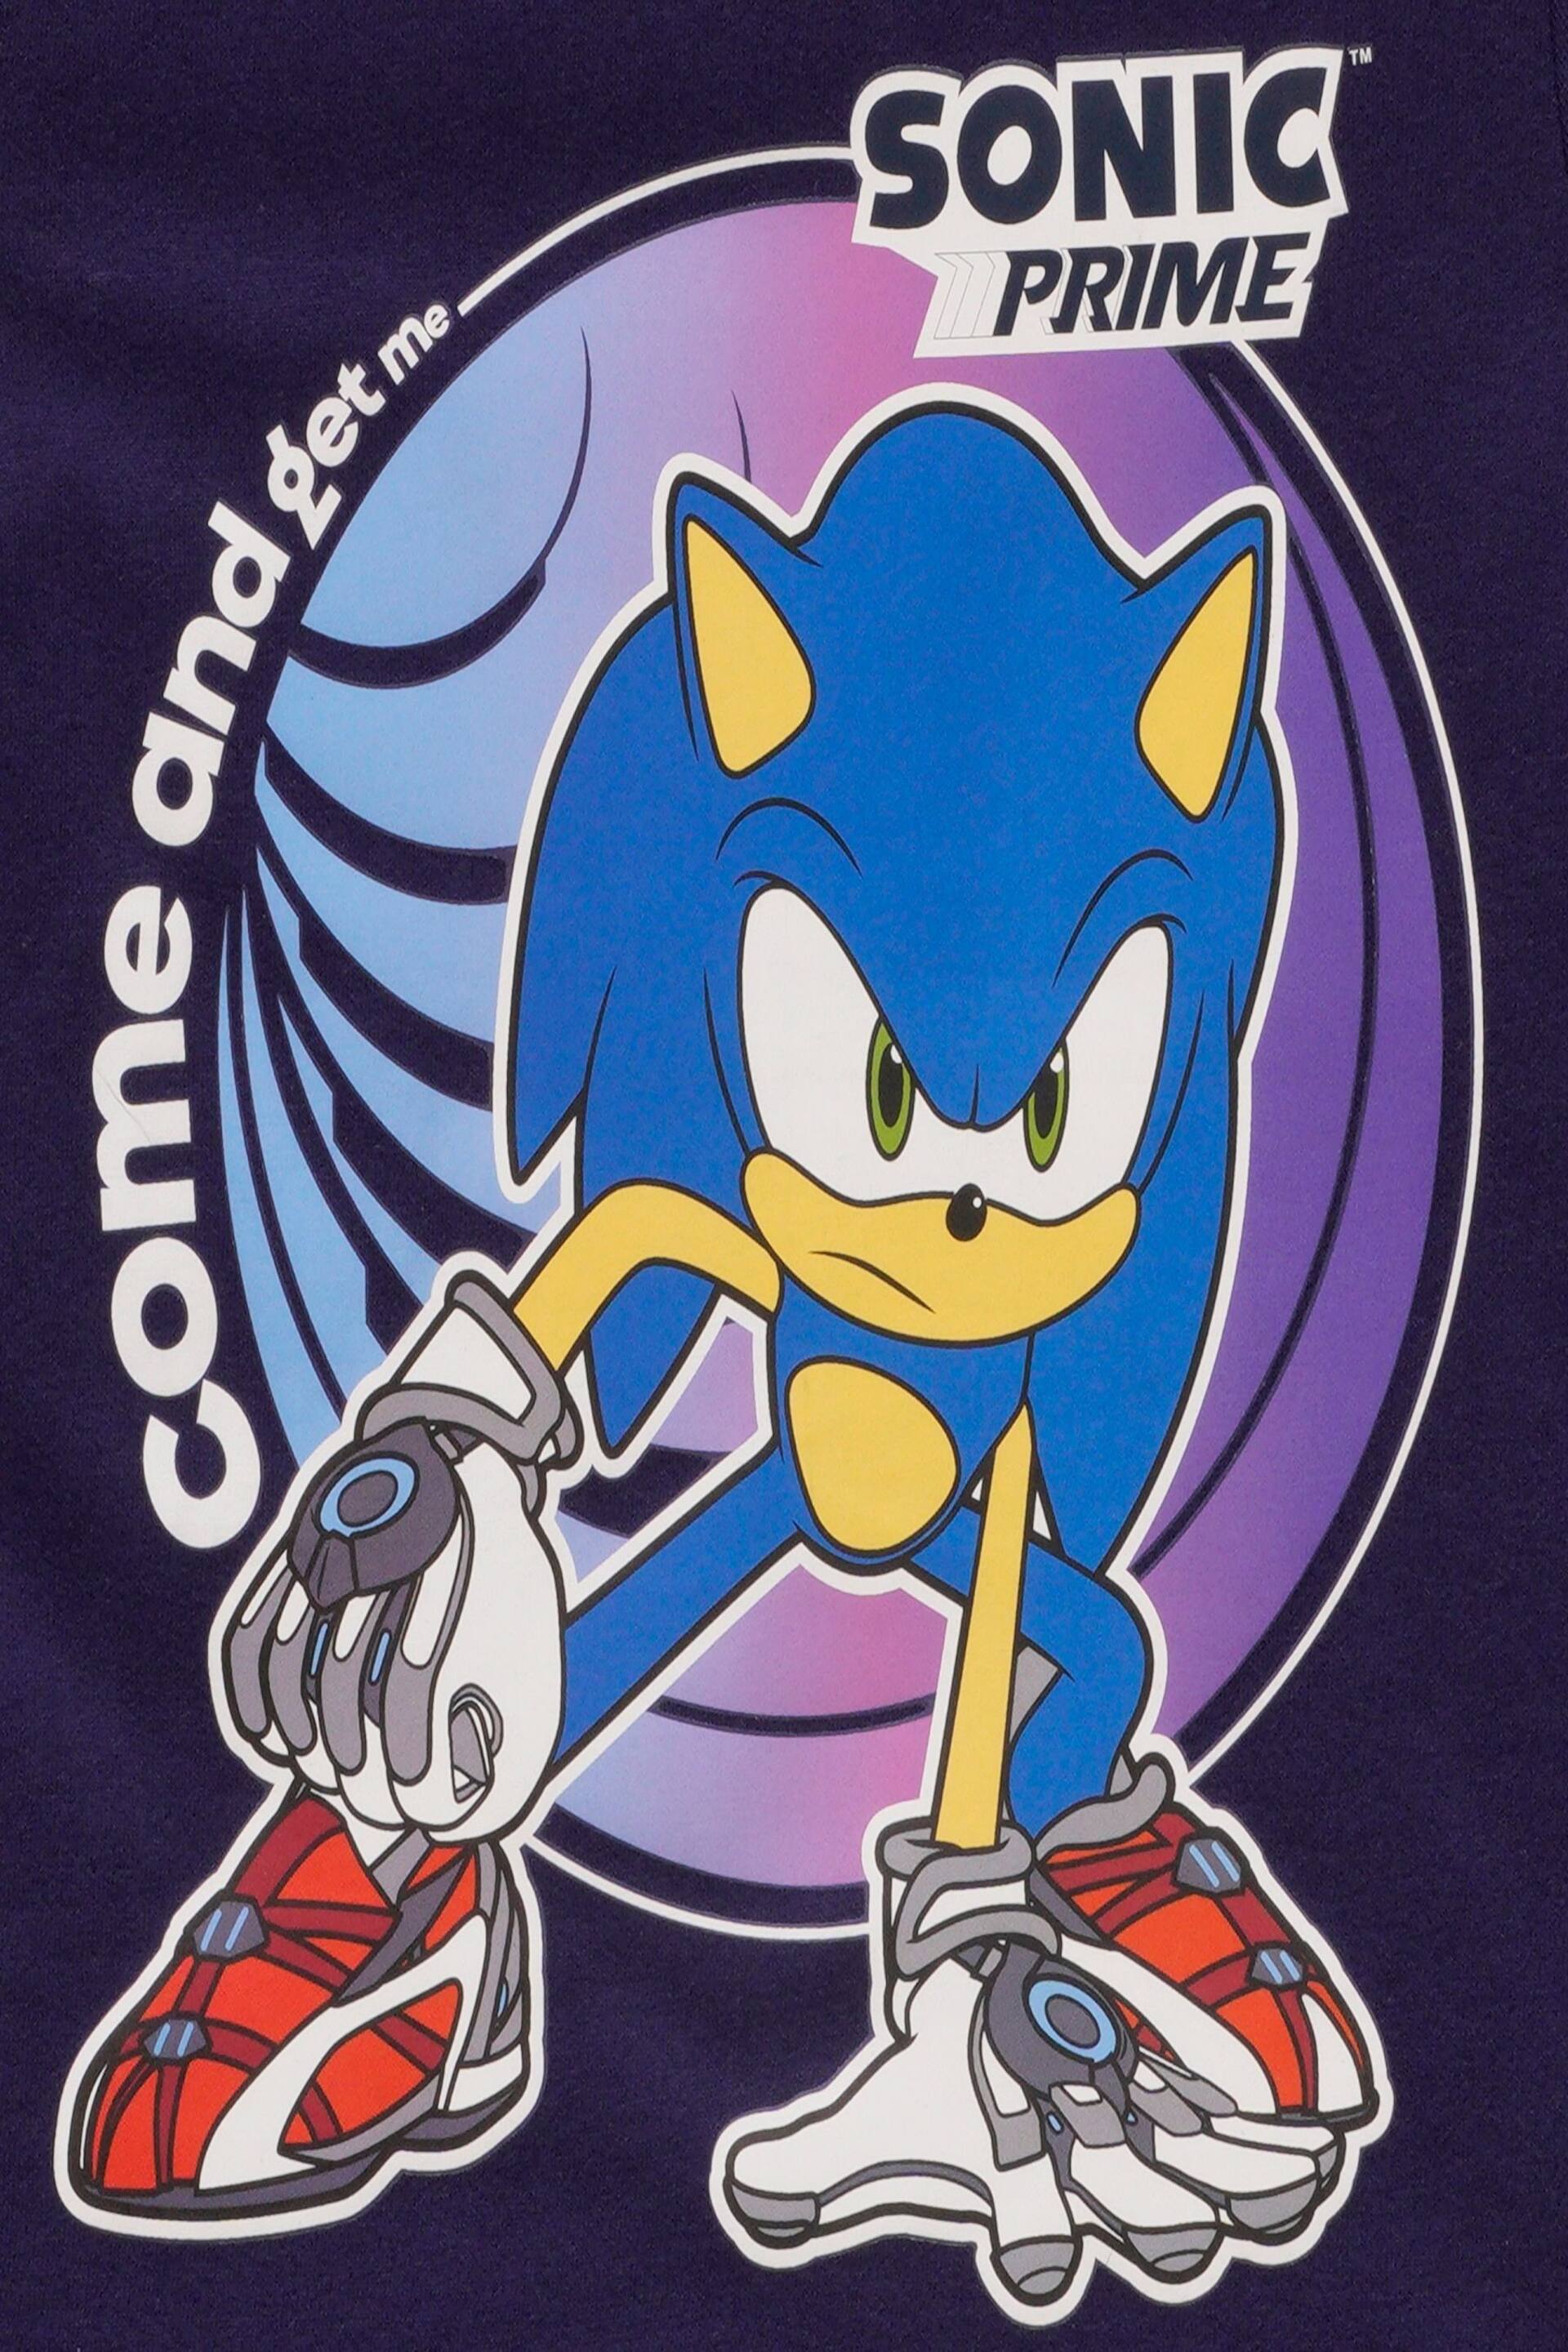 Brand Threads Blue Sonic Prime Boys Graphic T-Shirt - Image 3 of 3